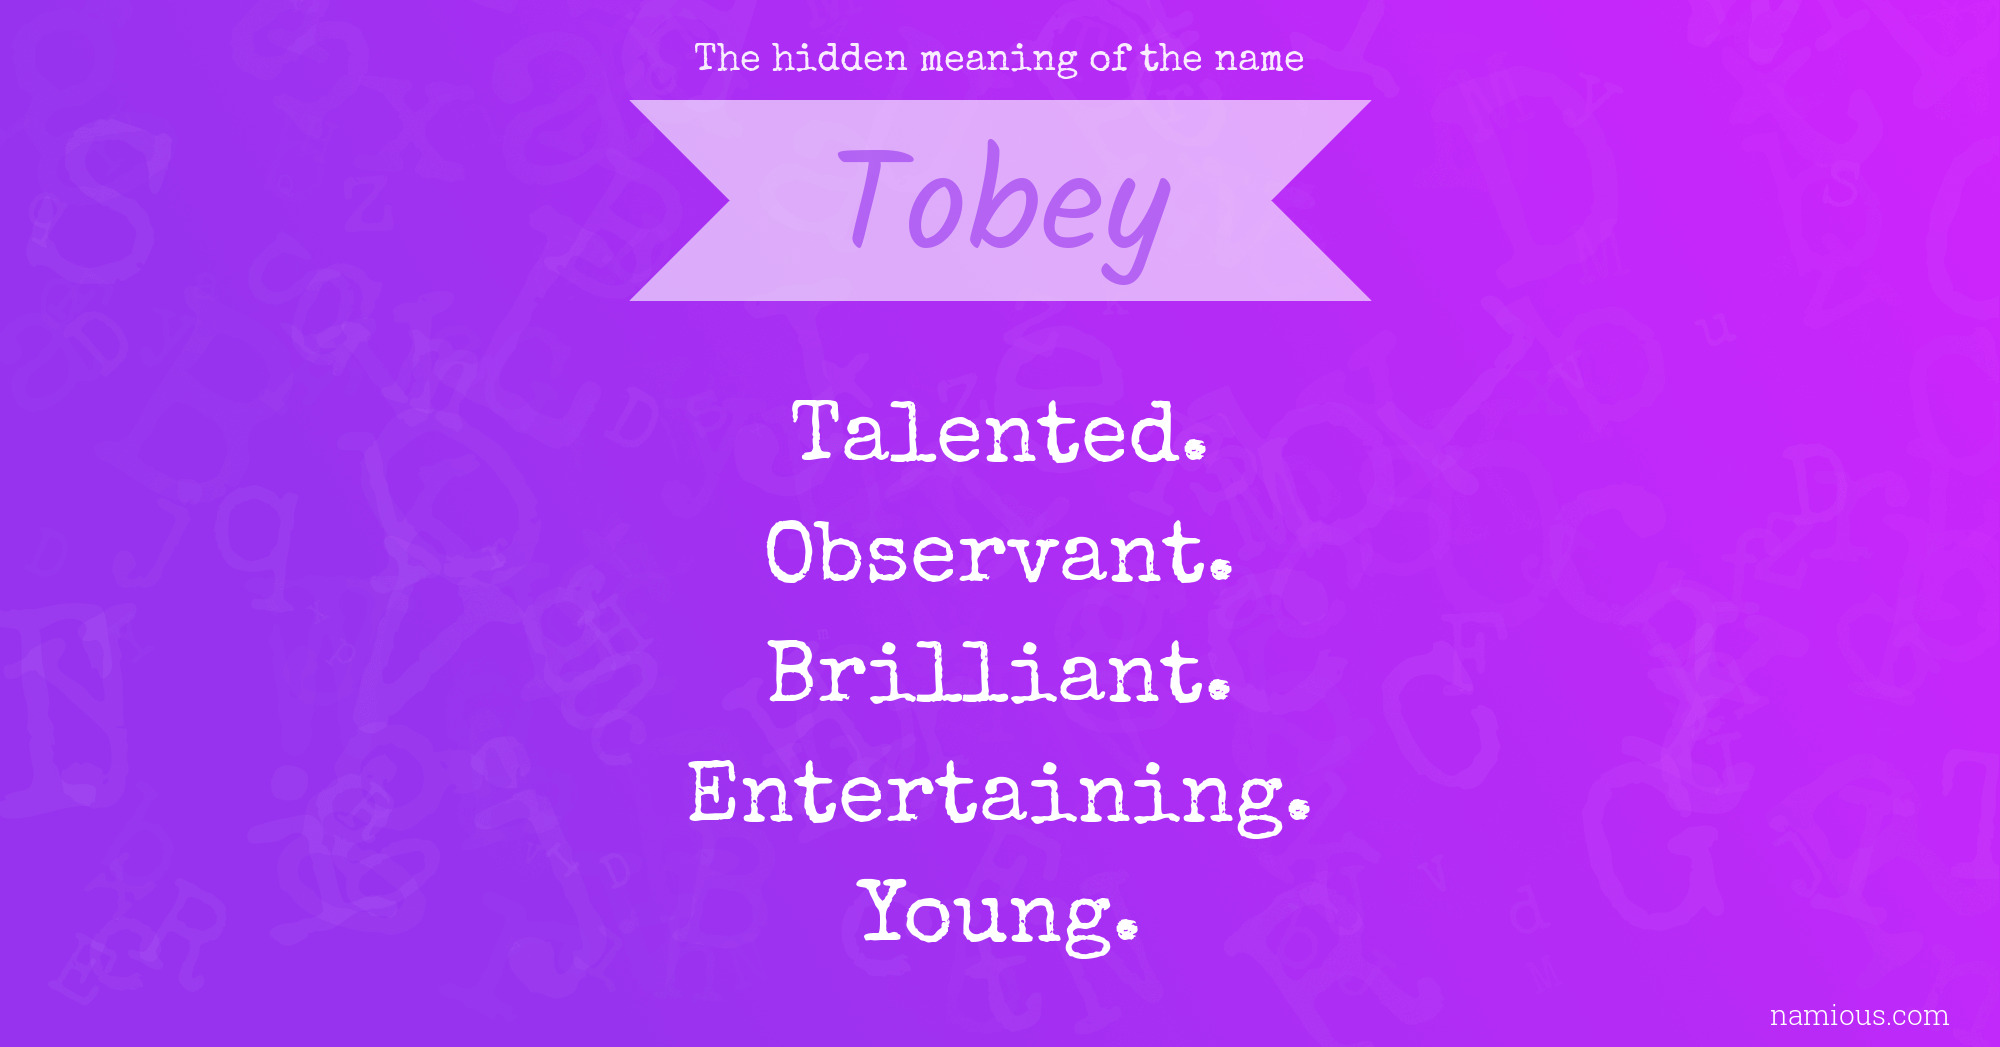 The hidden meaning of the name Tobey